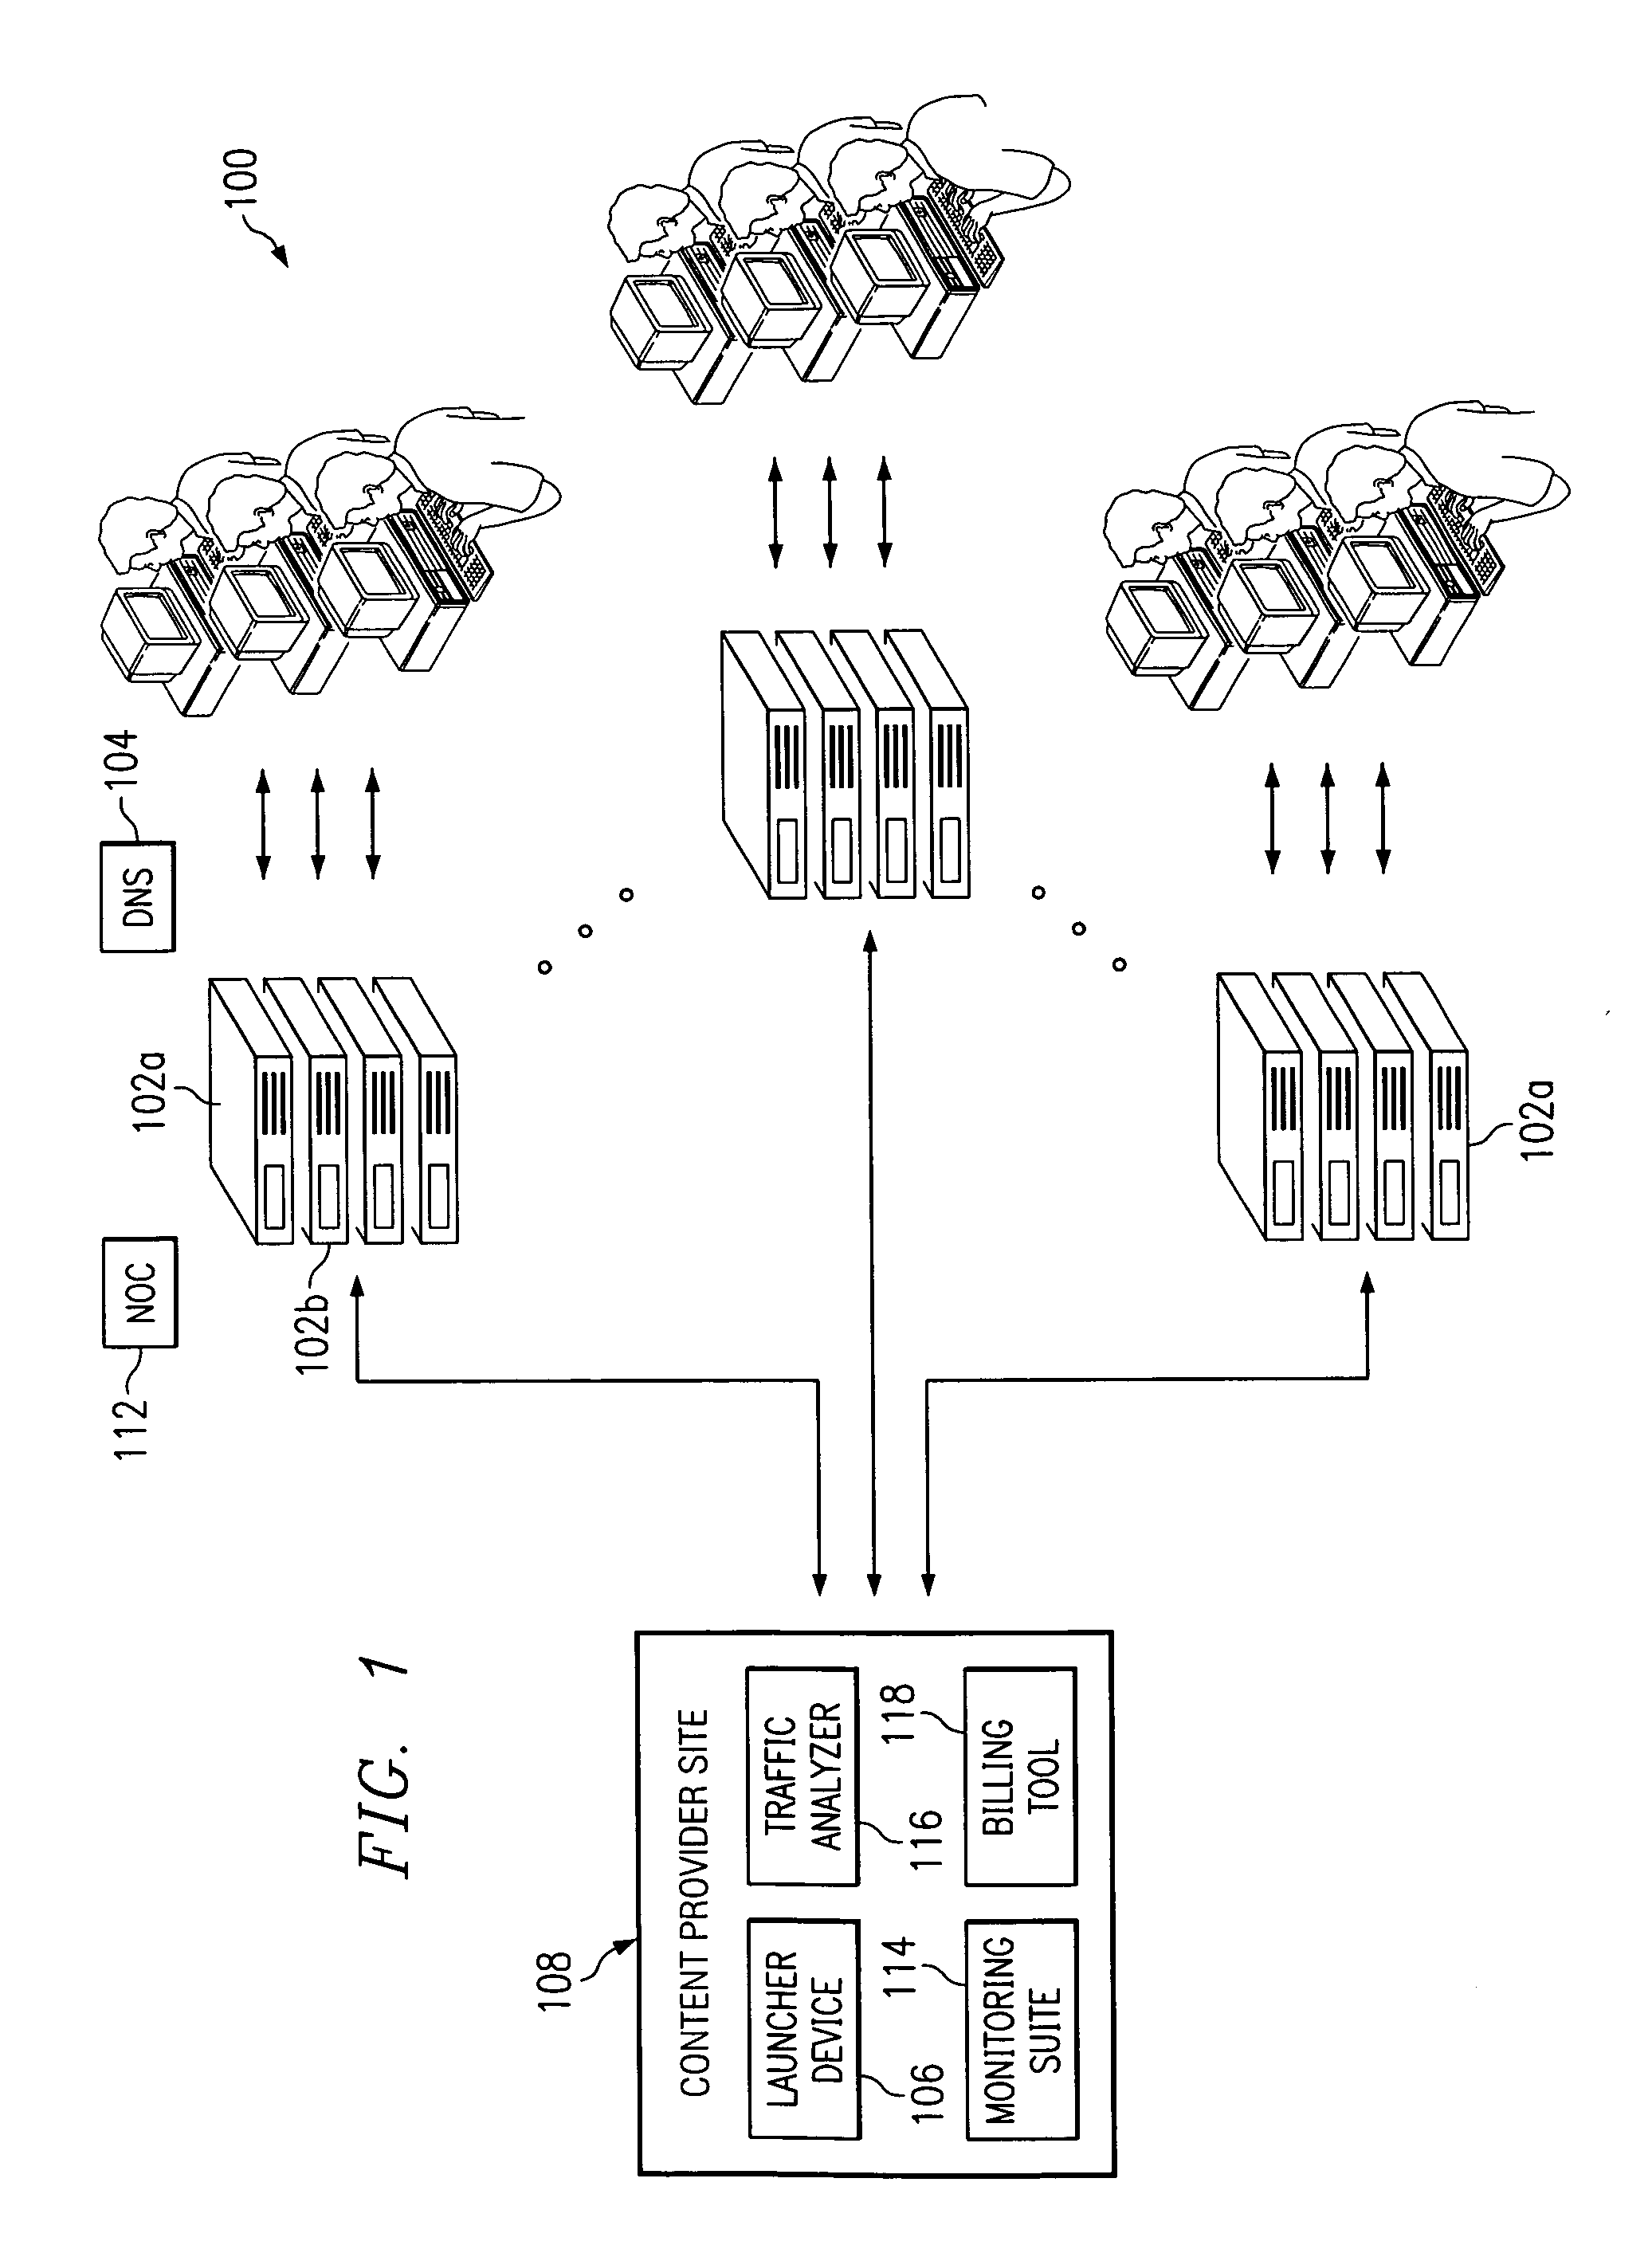 Internet content delivery service with third party cache interface support